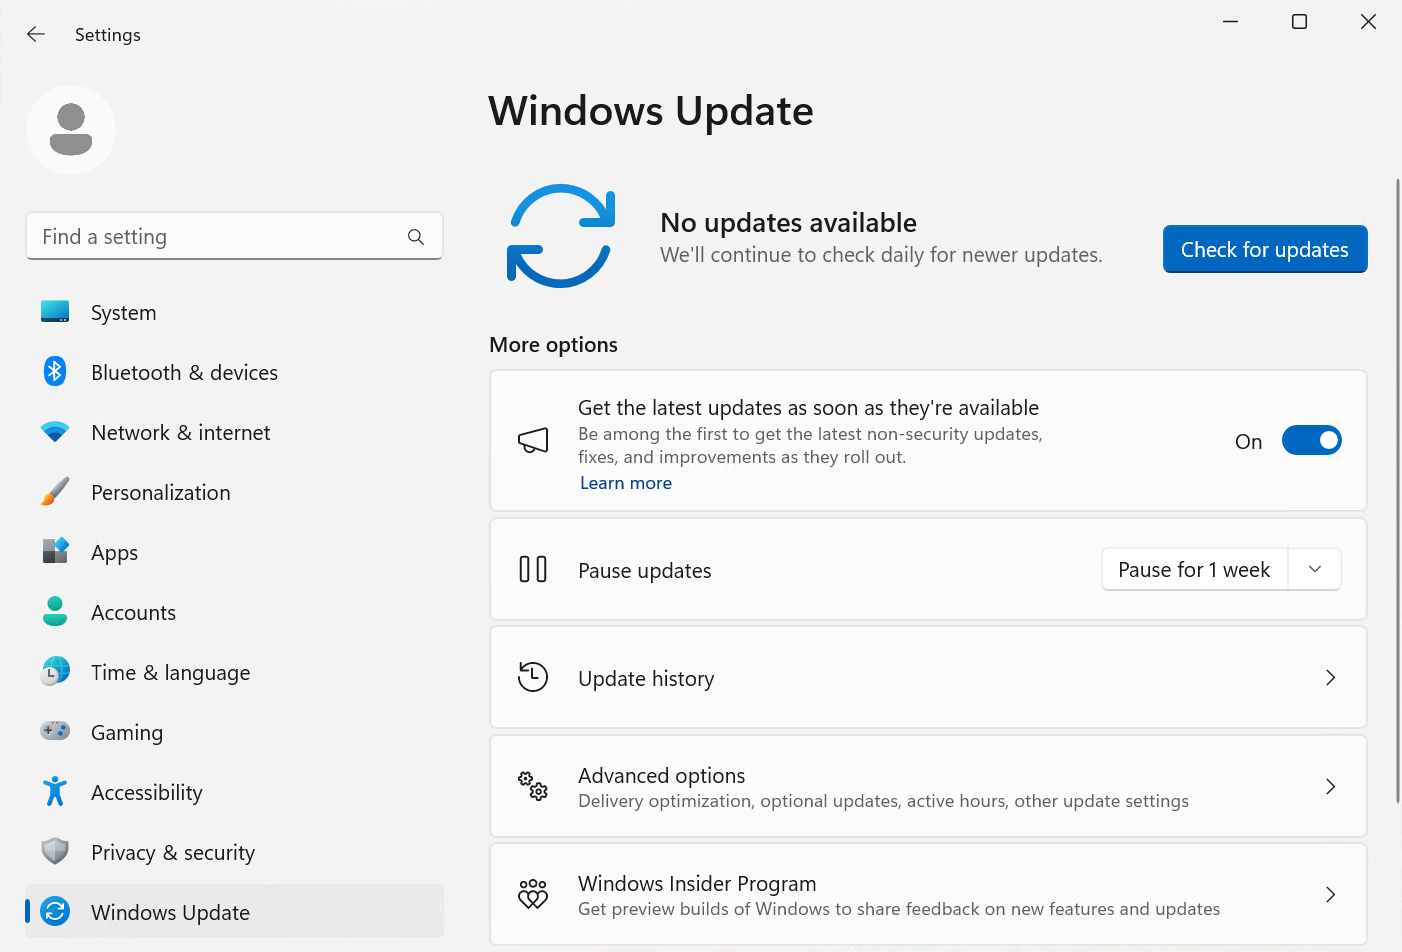 Screenshot of the Get the latest updates as soon as they're available option in the Windows updates page of Settings.